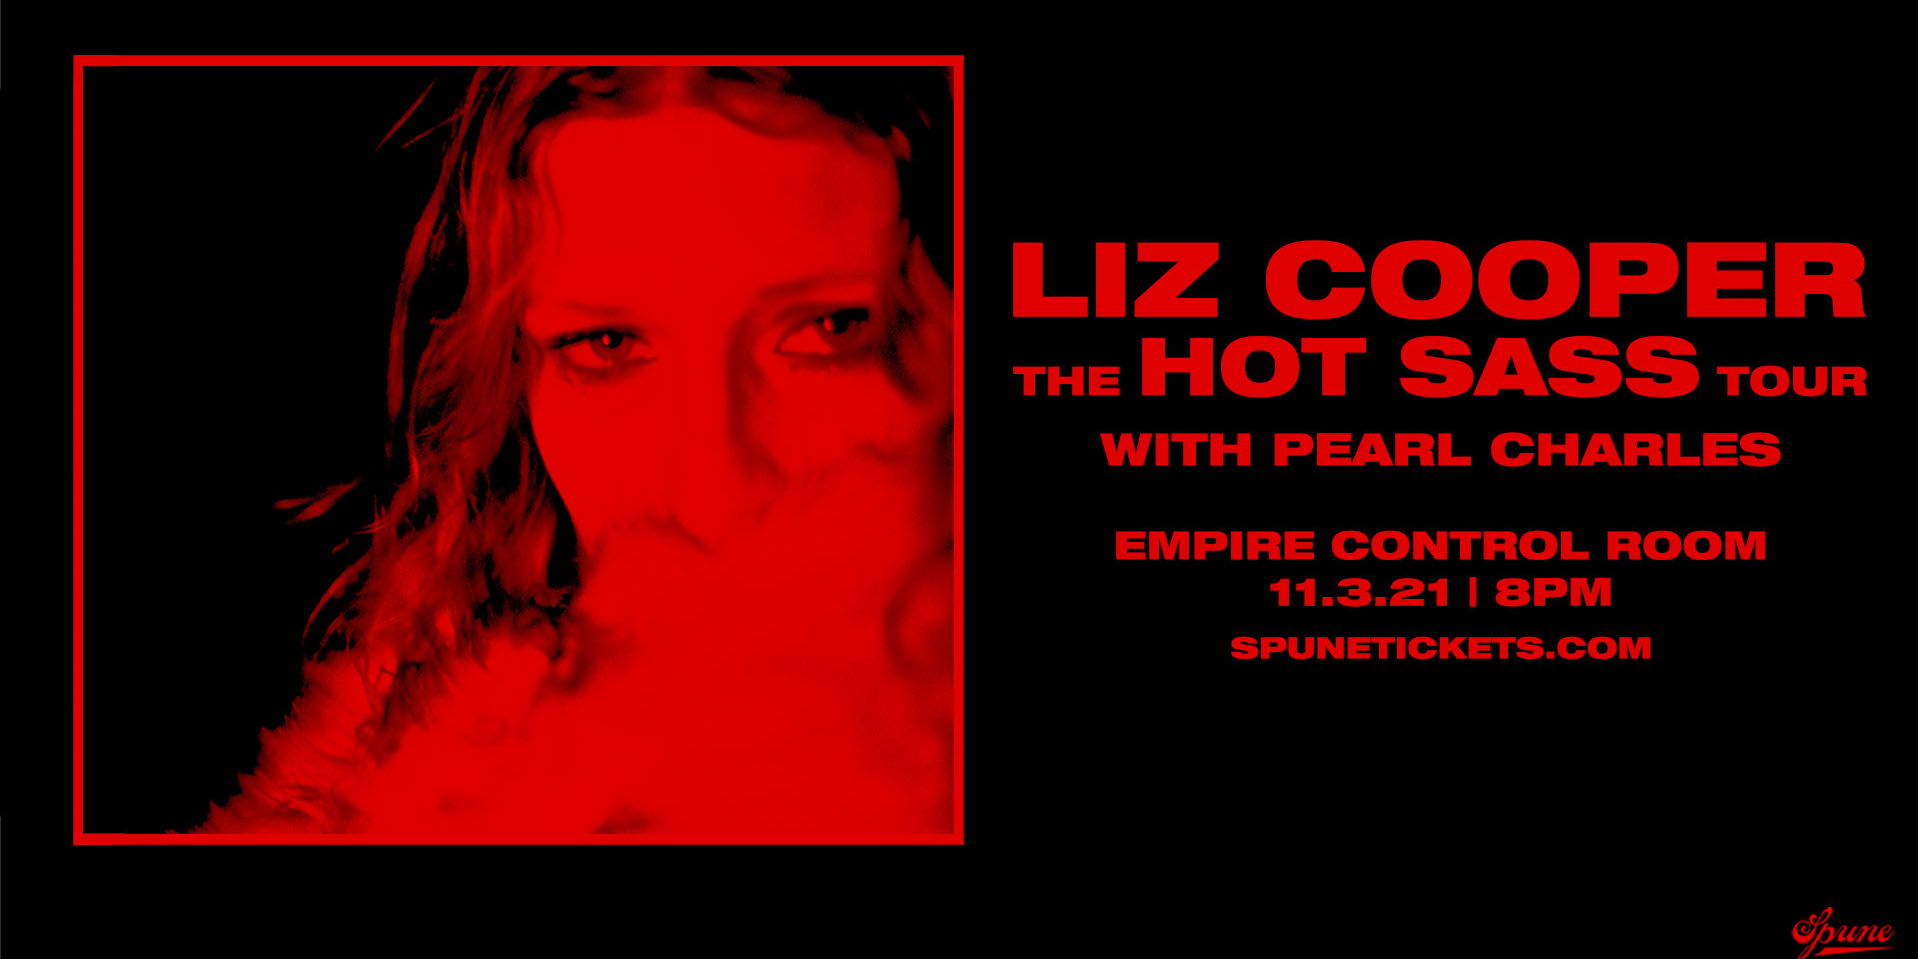 Liz Cooper The Hot Sass Tour w/ Pearl Charles at Empire Control Room 11/3  promotional image